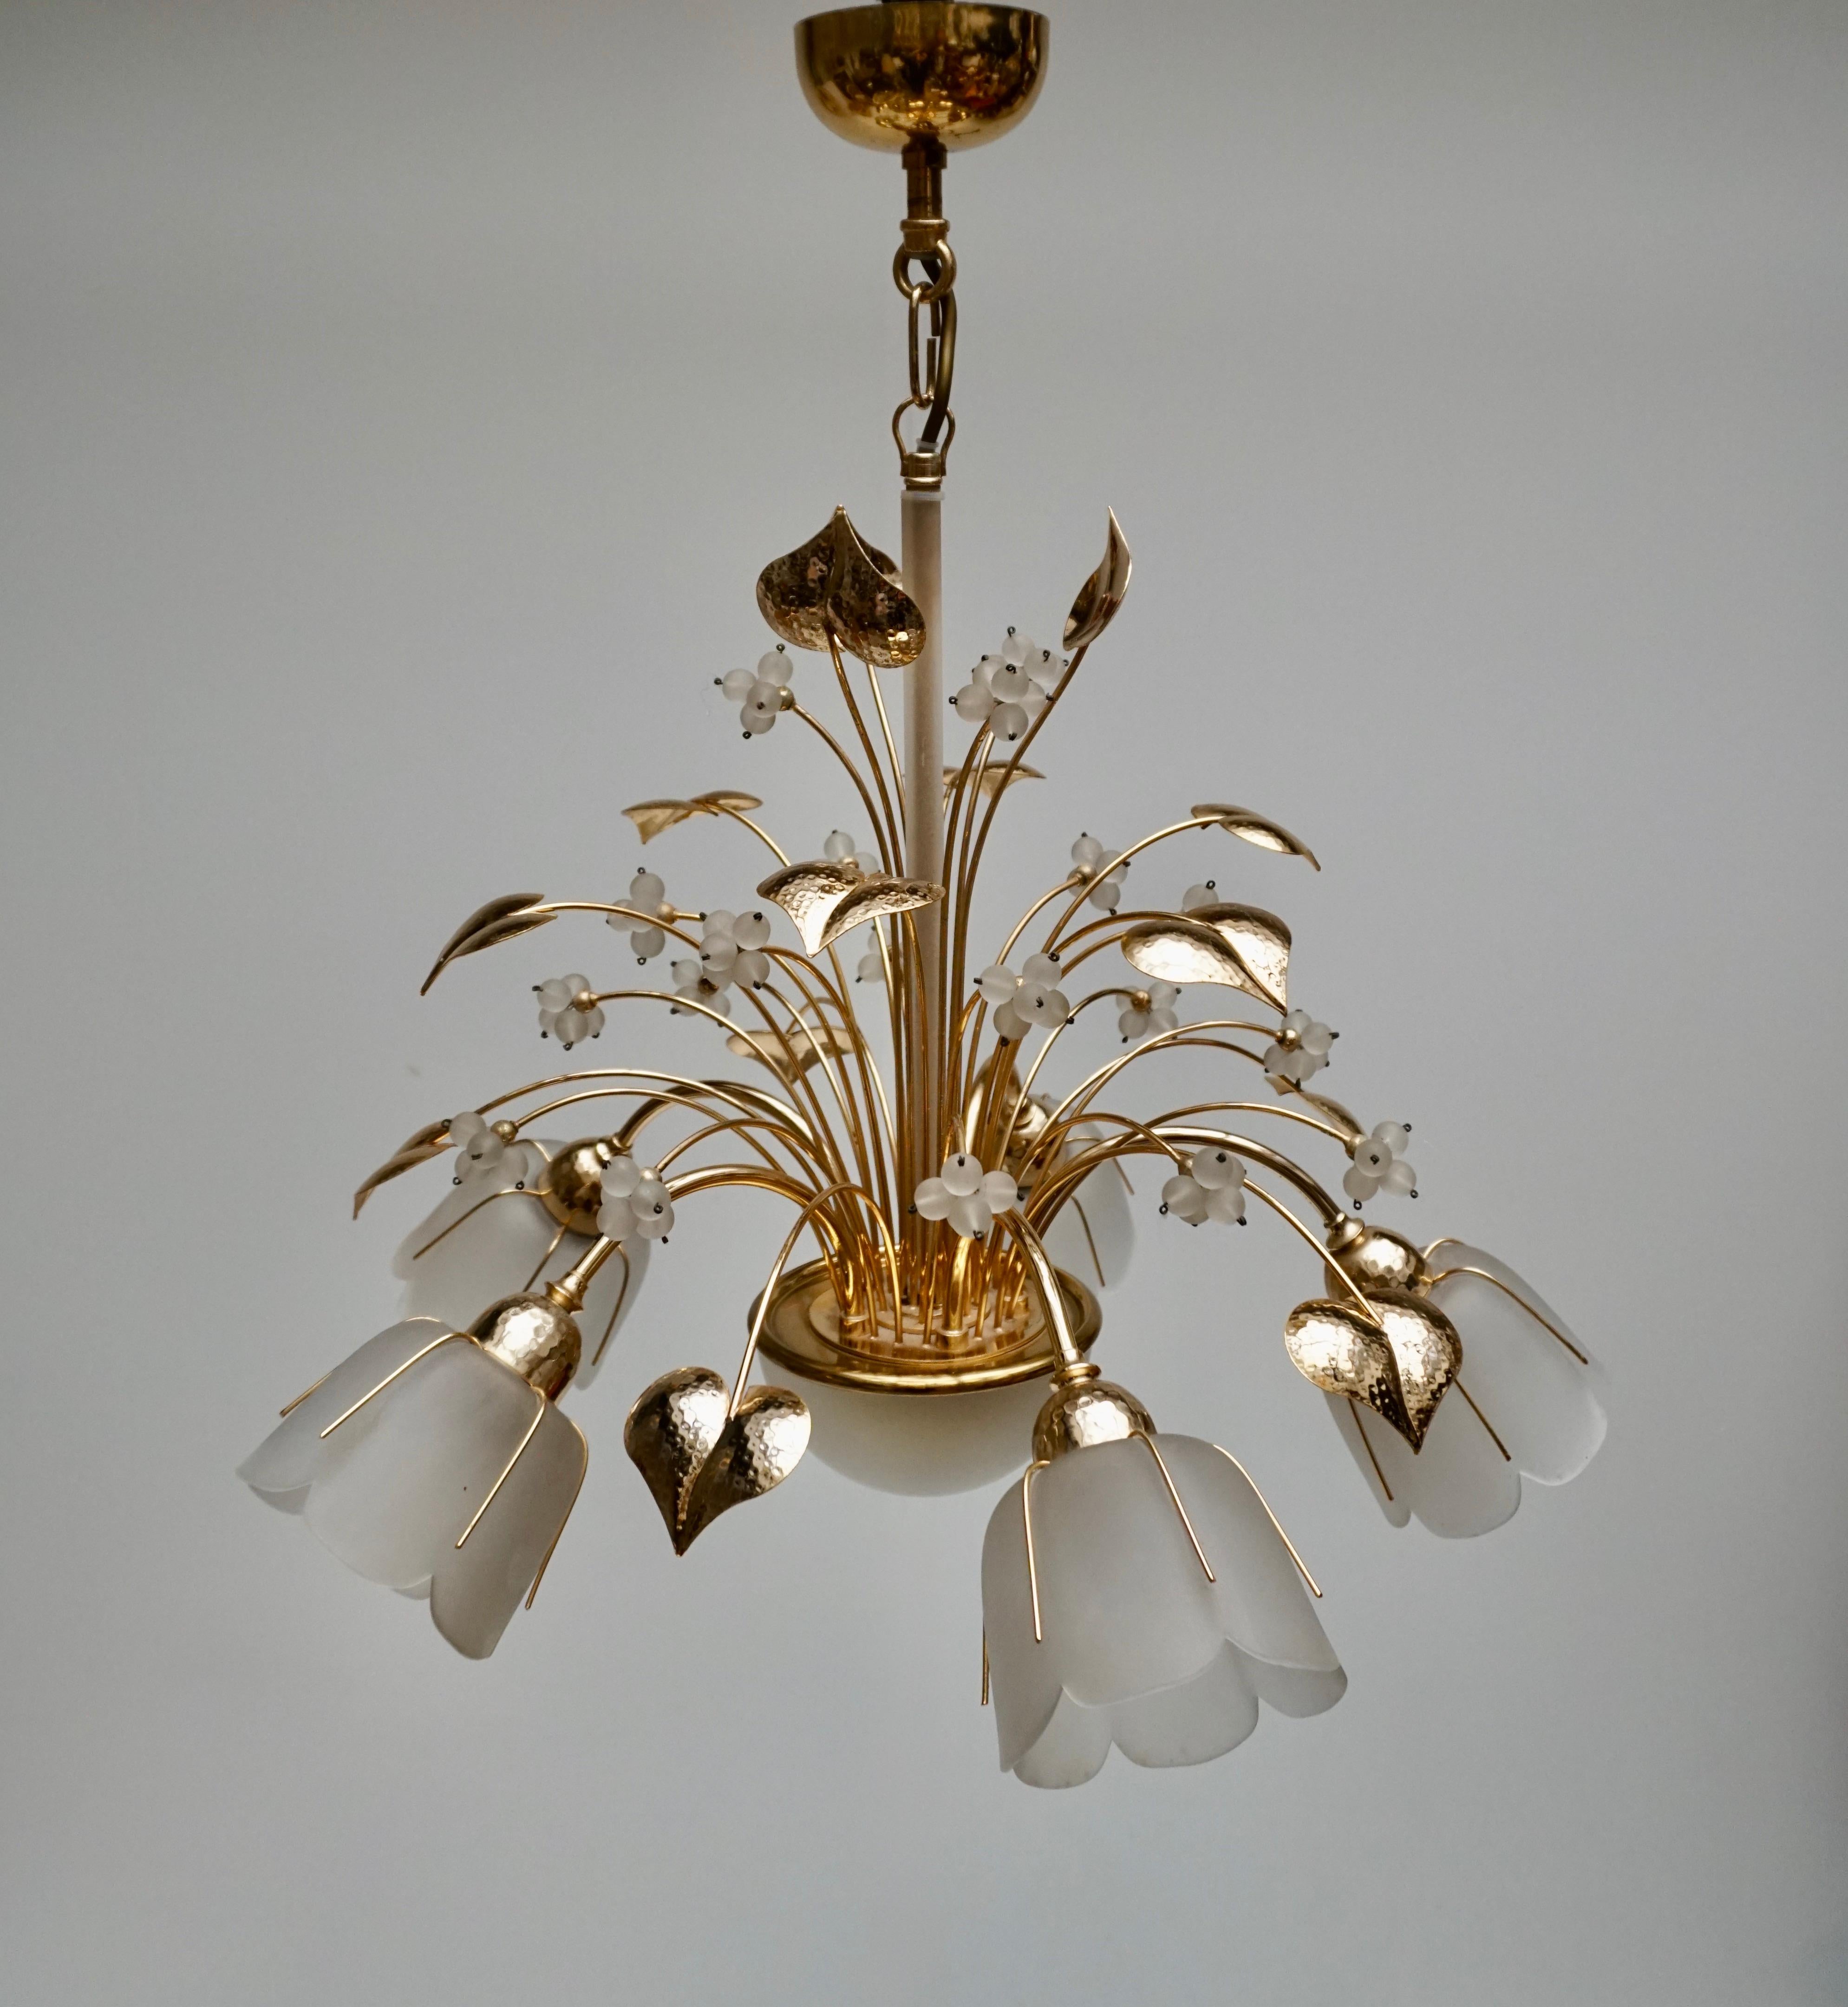 Italian Hollywood regency 5-light chandelier in brass and glass.
Measures: Diameter 55 cm.
Height fixture 45 cm.
Total height with the chain is 65 cm.